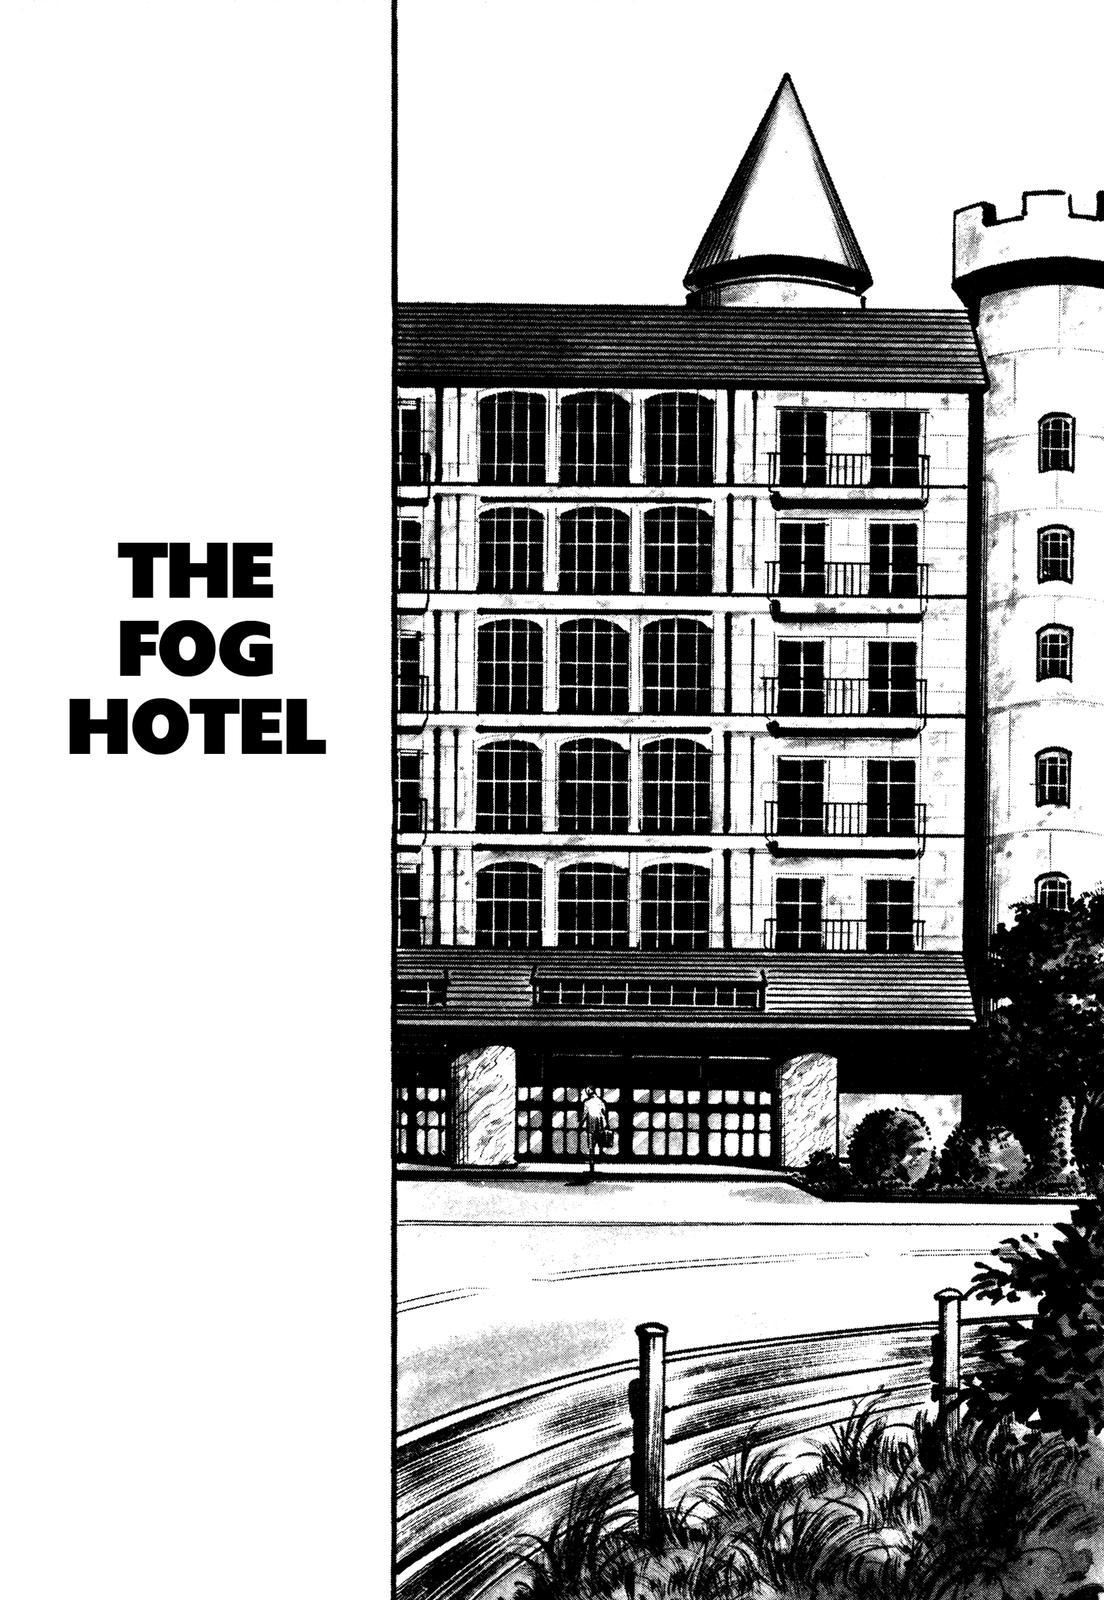 Doll: The Hotel Detective Vol. 2 Ch. 6 The Fog Hotel